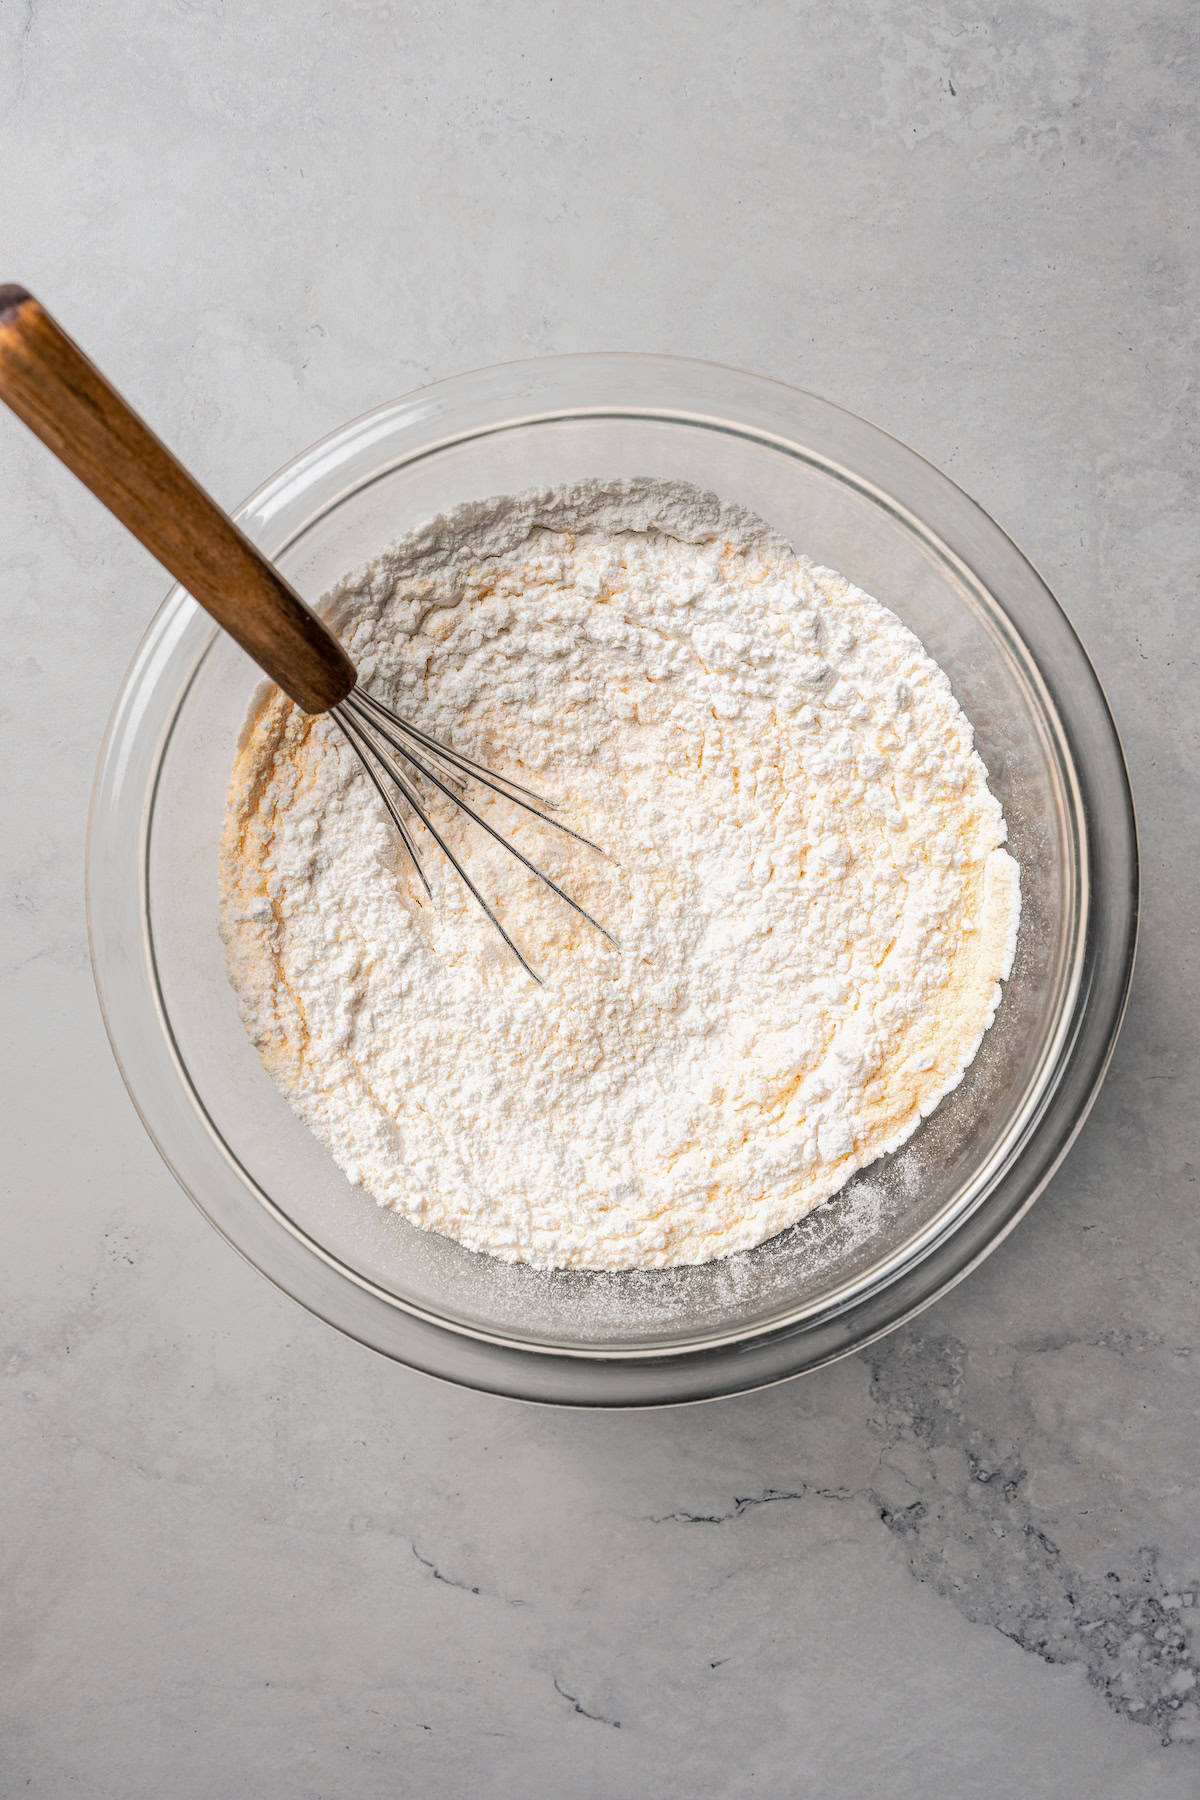 Dry ingredients whisked together in a glass bowl with a wooden-handled whisk.